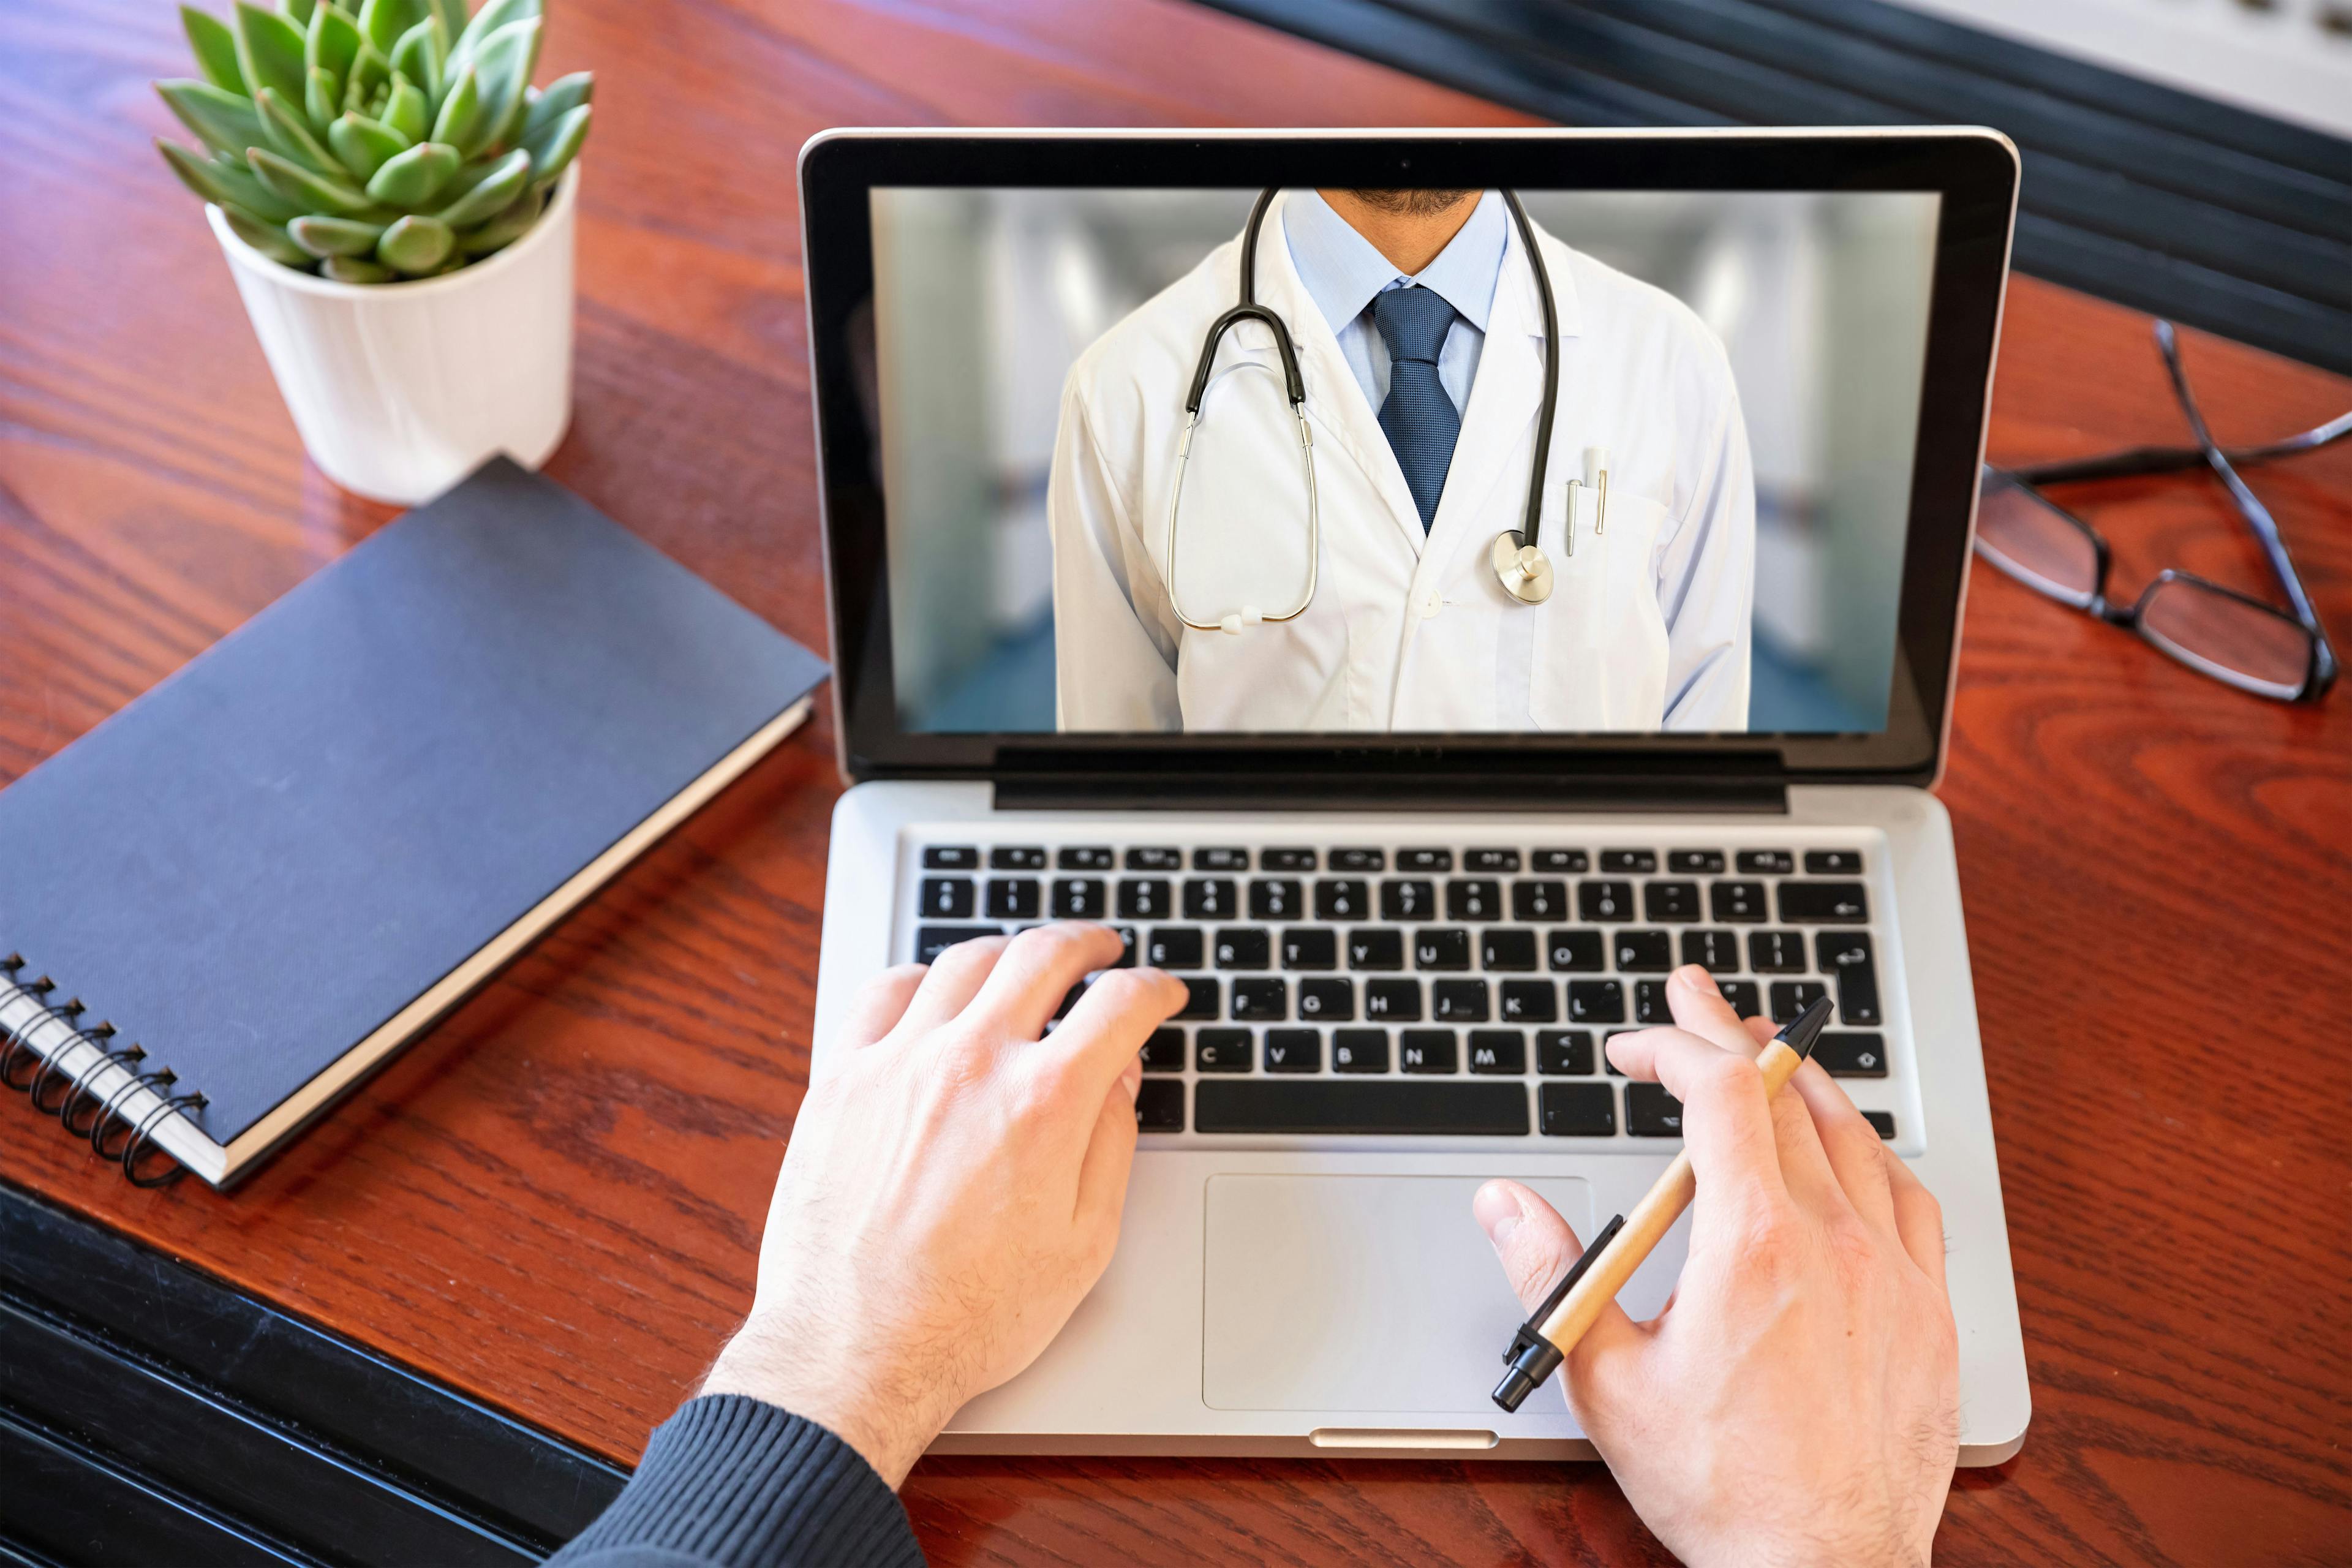 Overlooked: Improving telehealth for those who have trouble seeing 